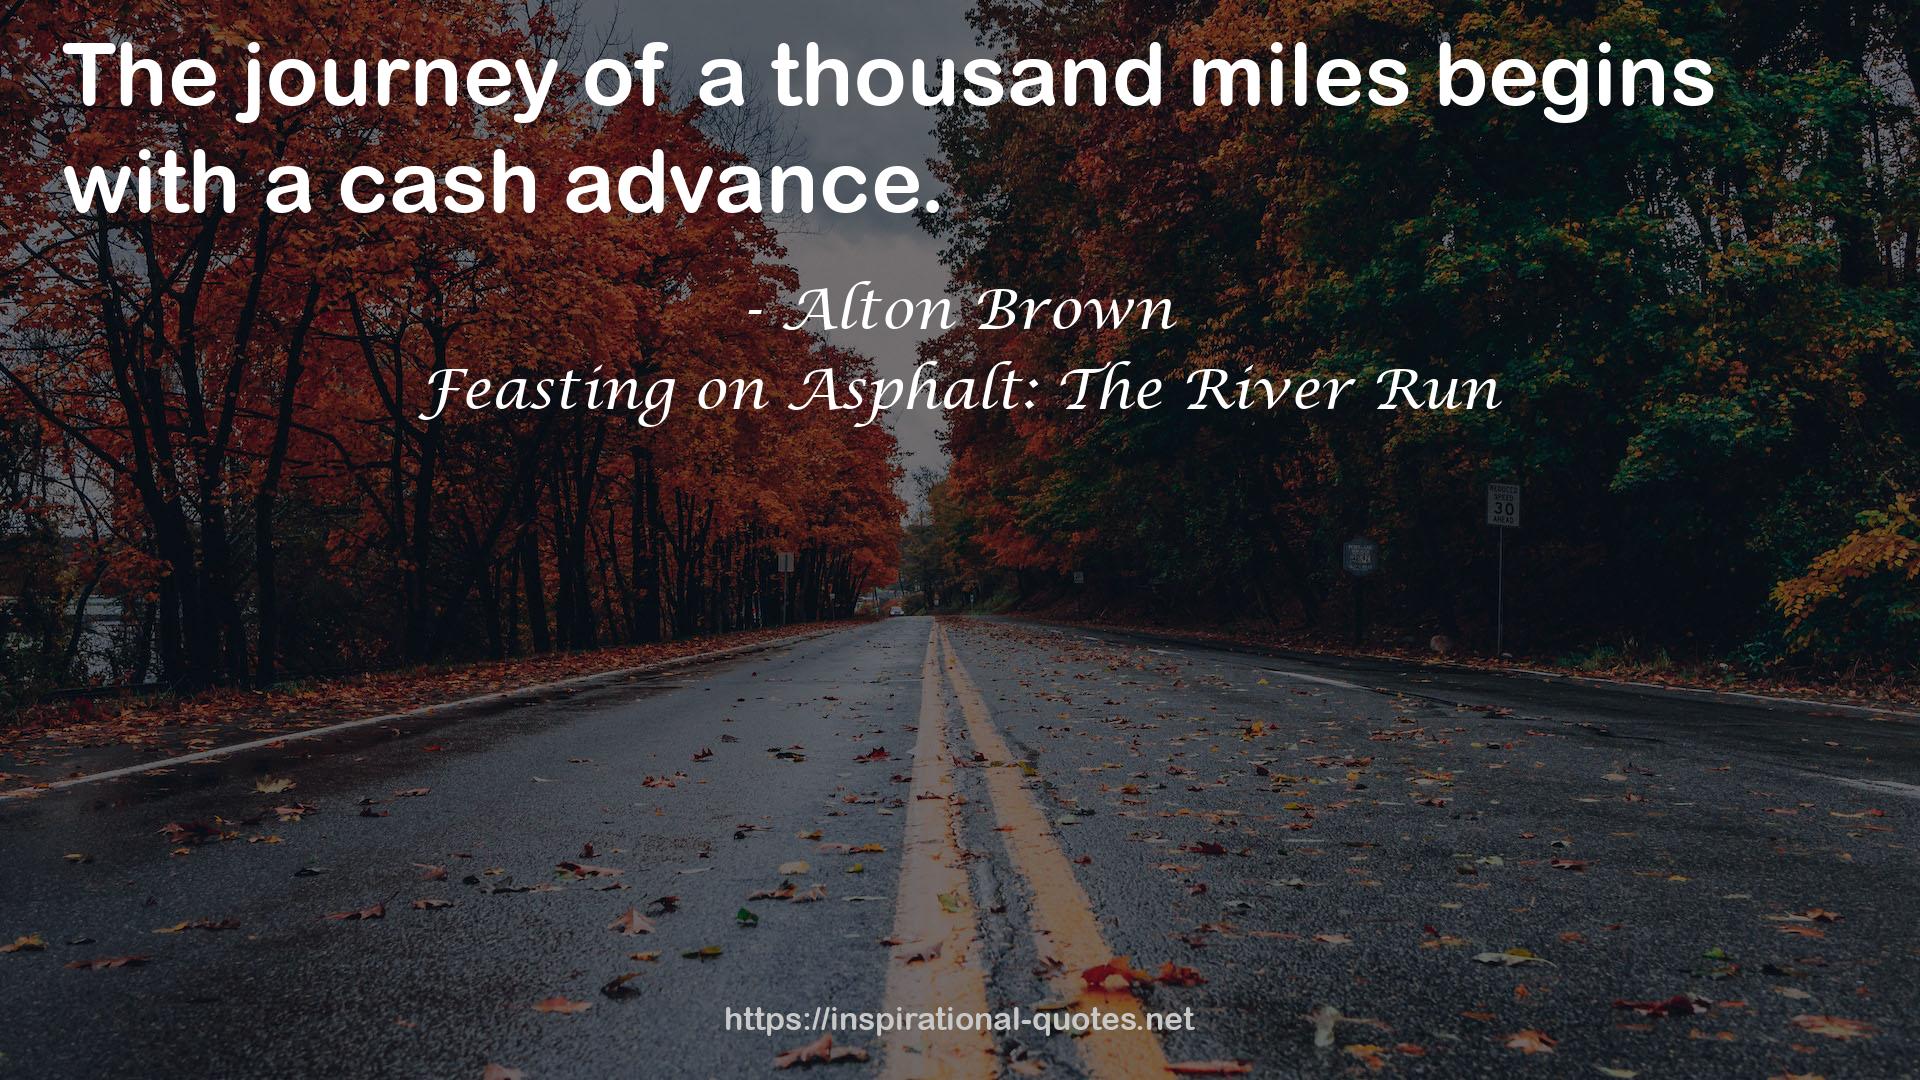 Feasting on Asphalt: The River Run QUOTES